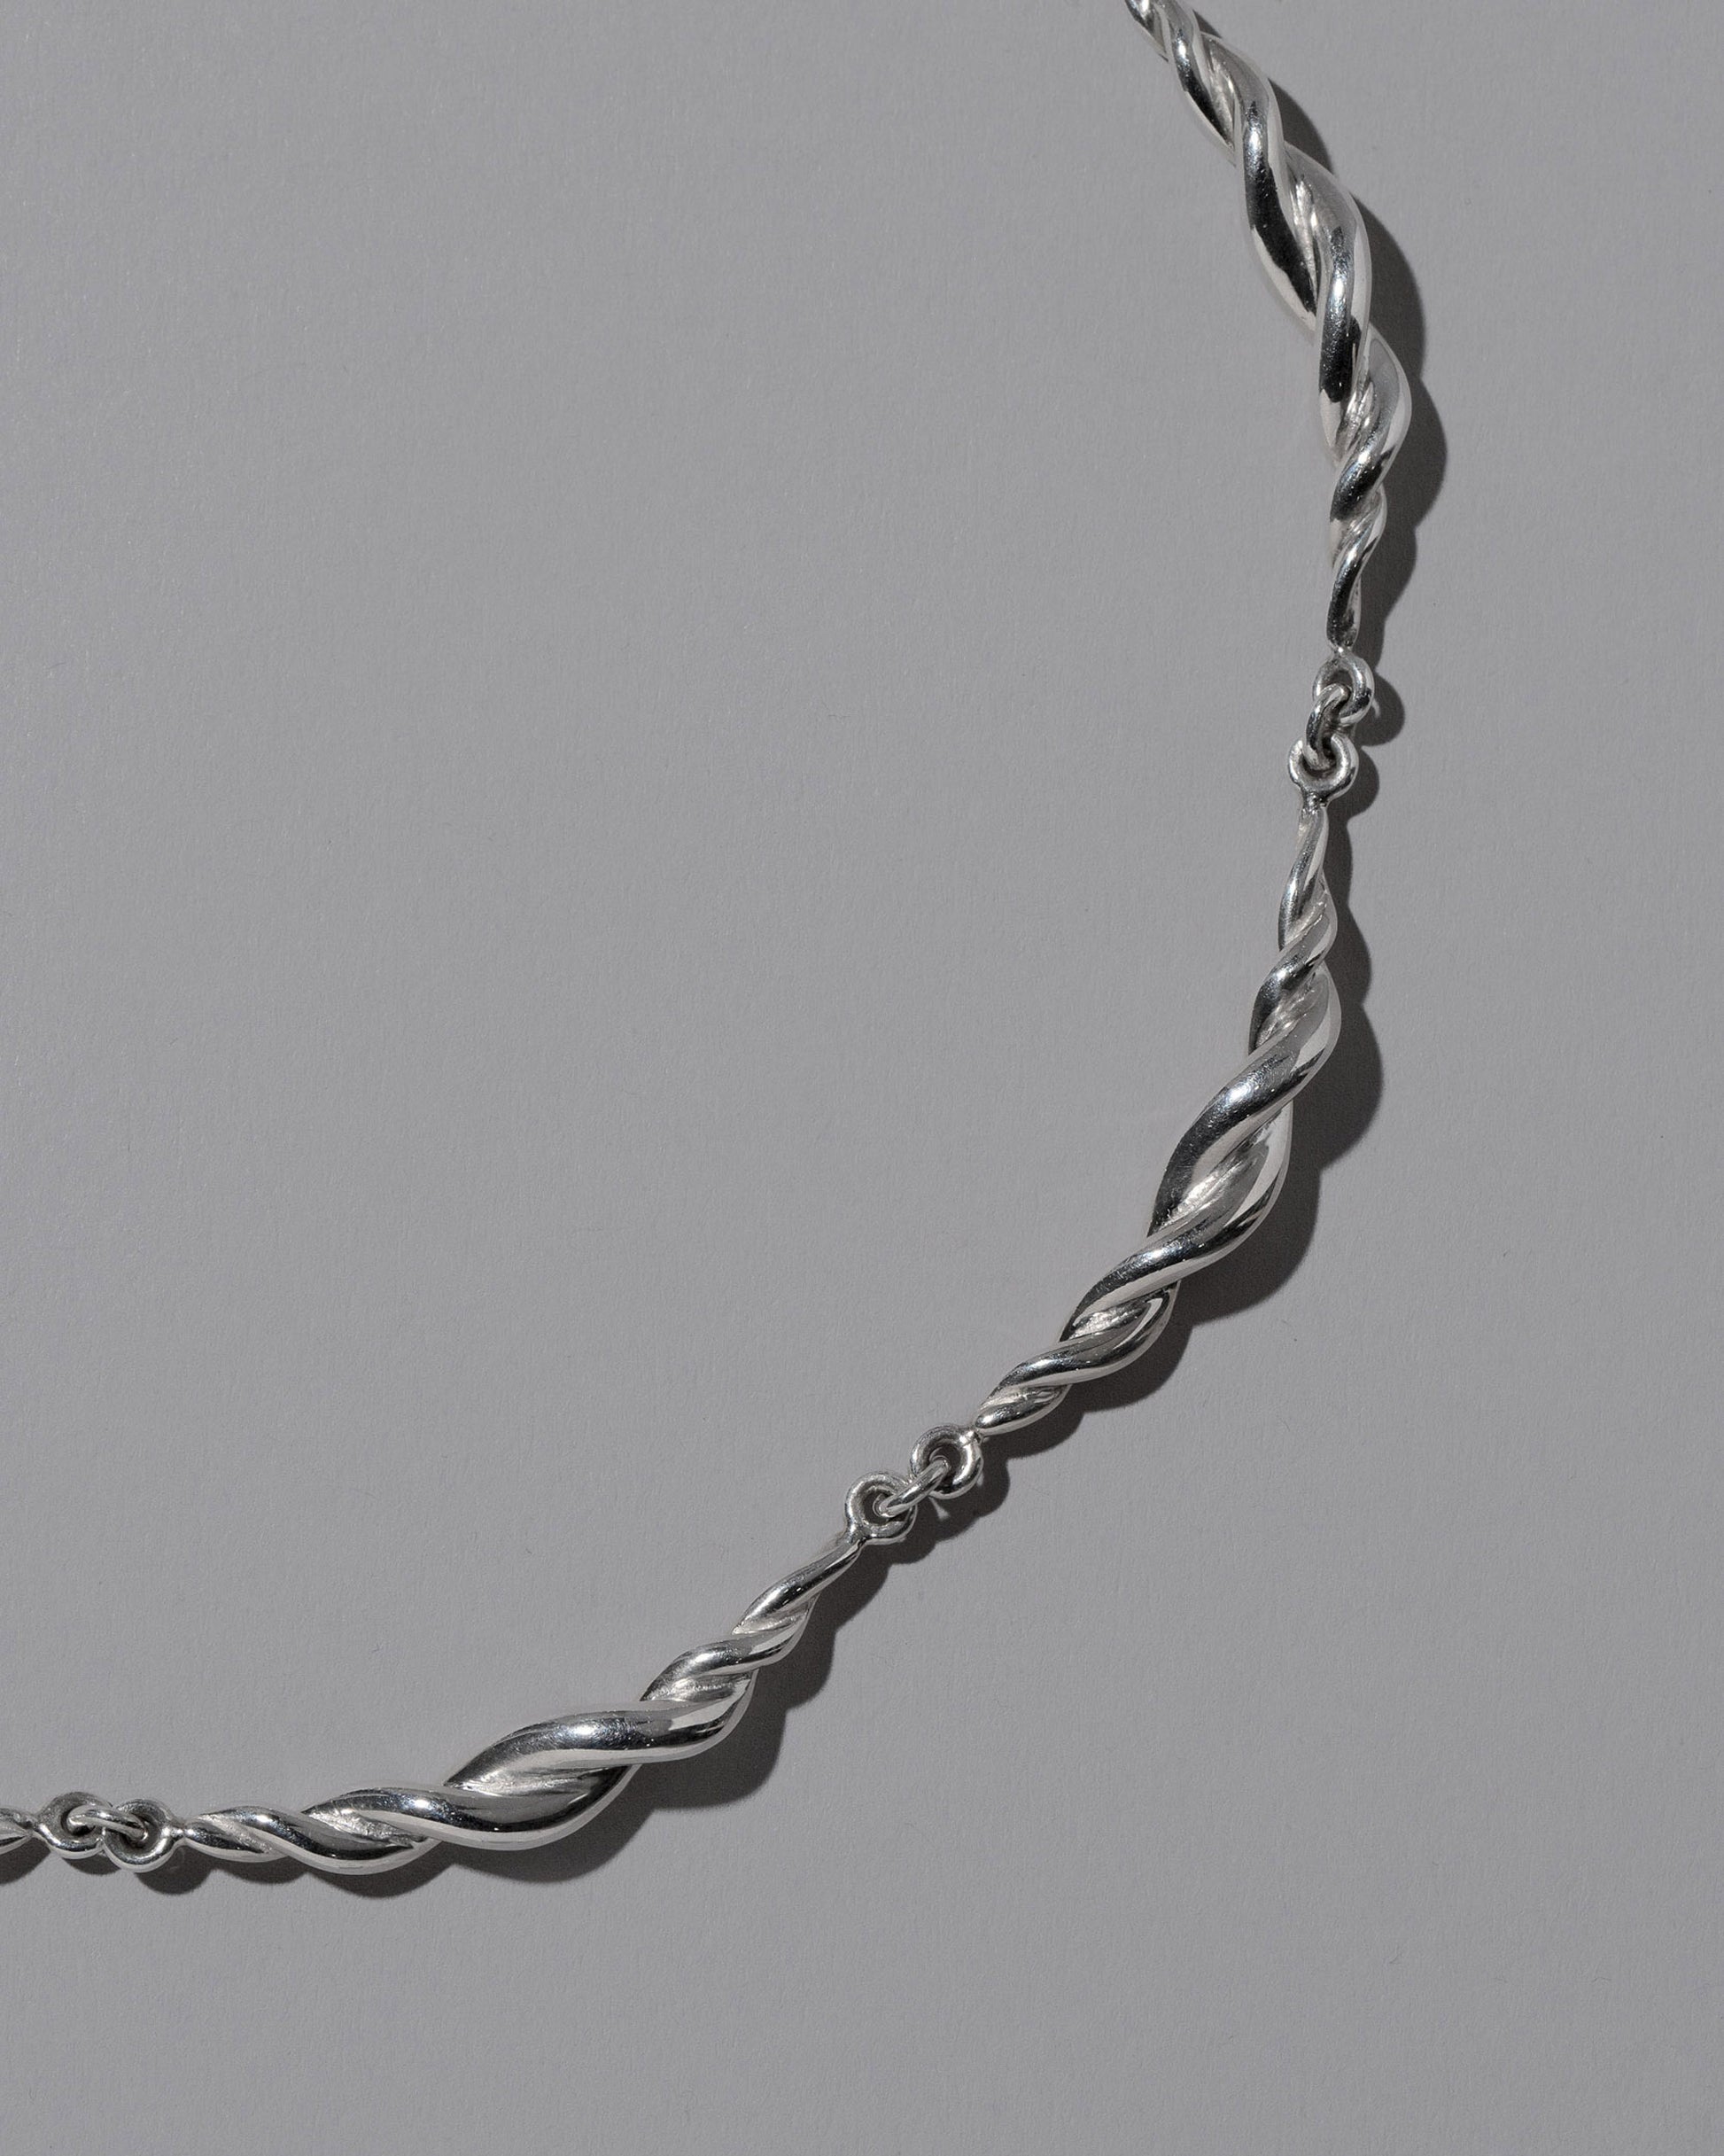 Closeup details of the CRZM Sterling Silver Foothill Necklace on light color background.